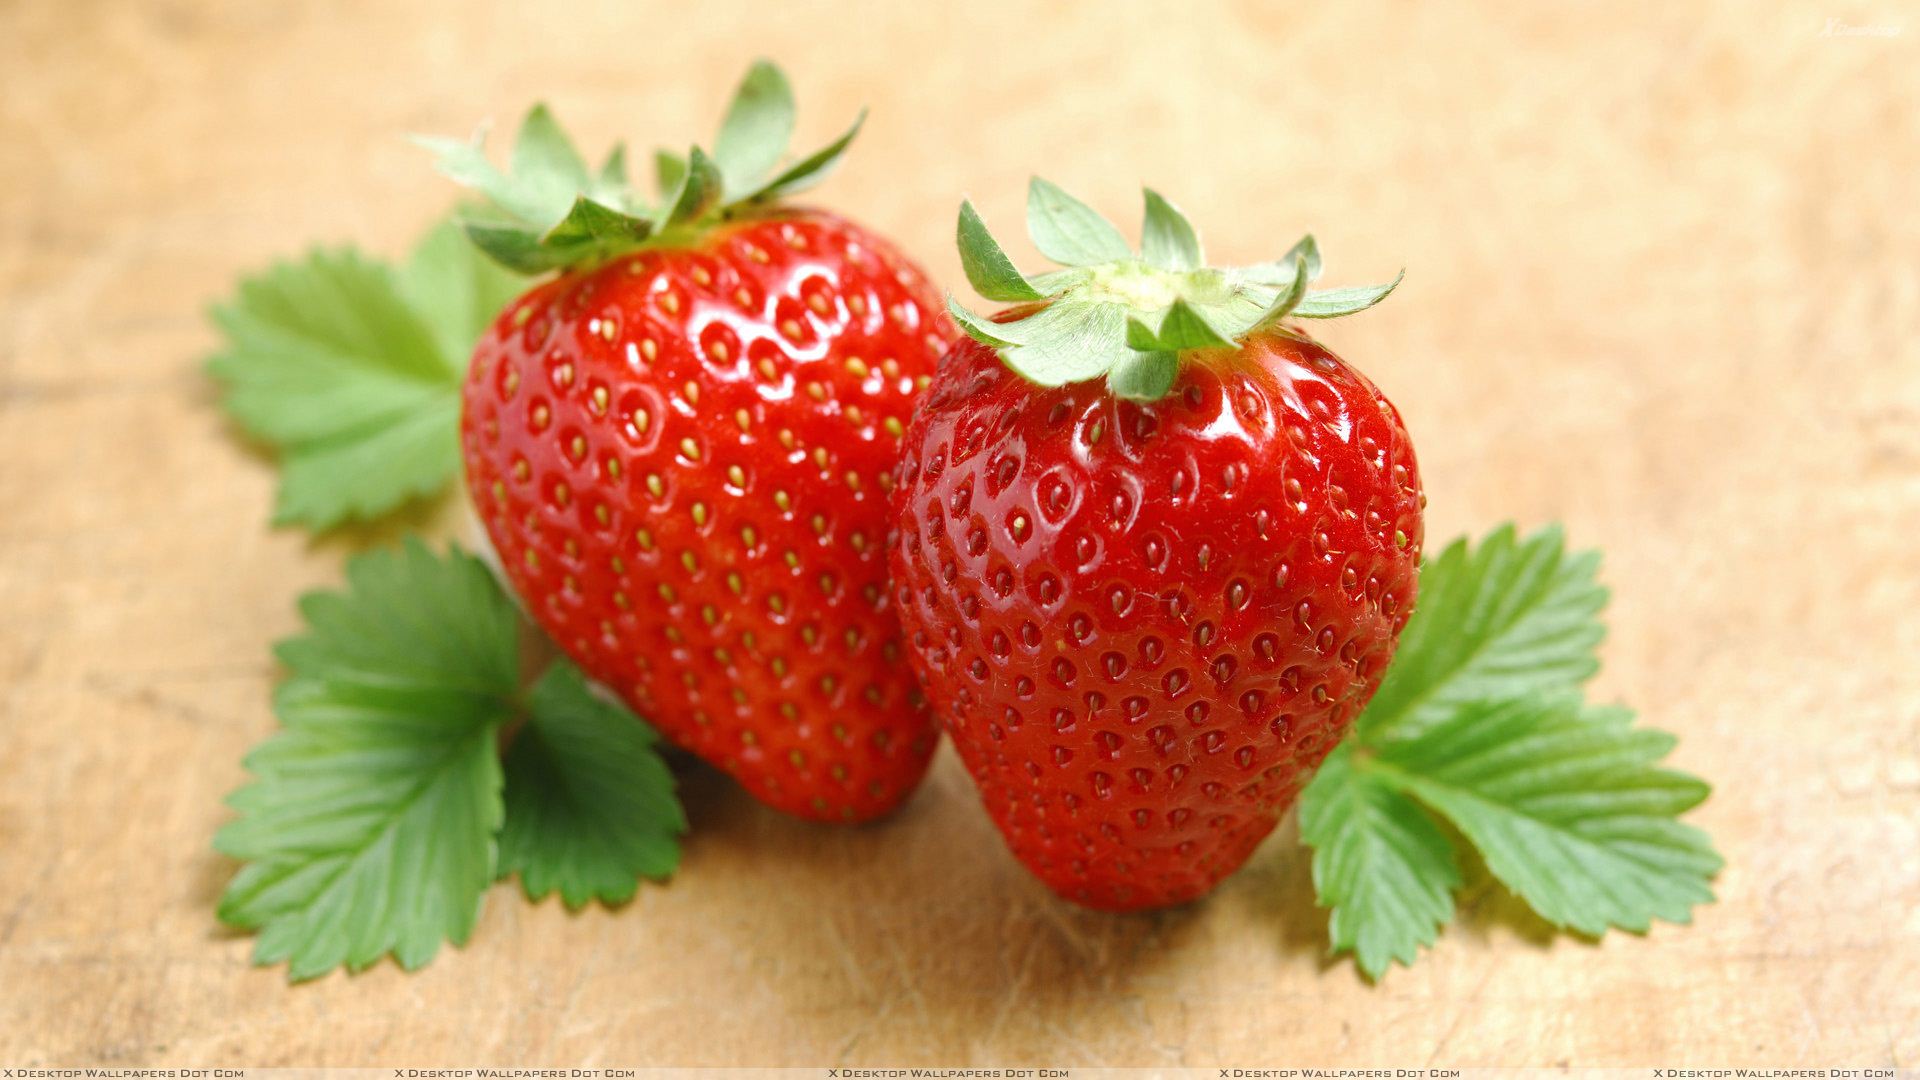 Strawberries Wallpapers, Photos & Images in HD